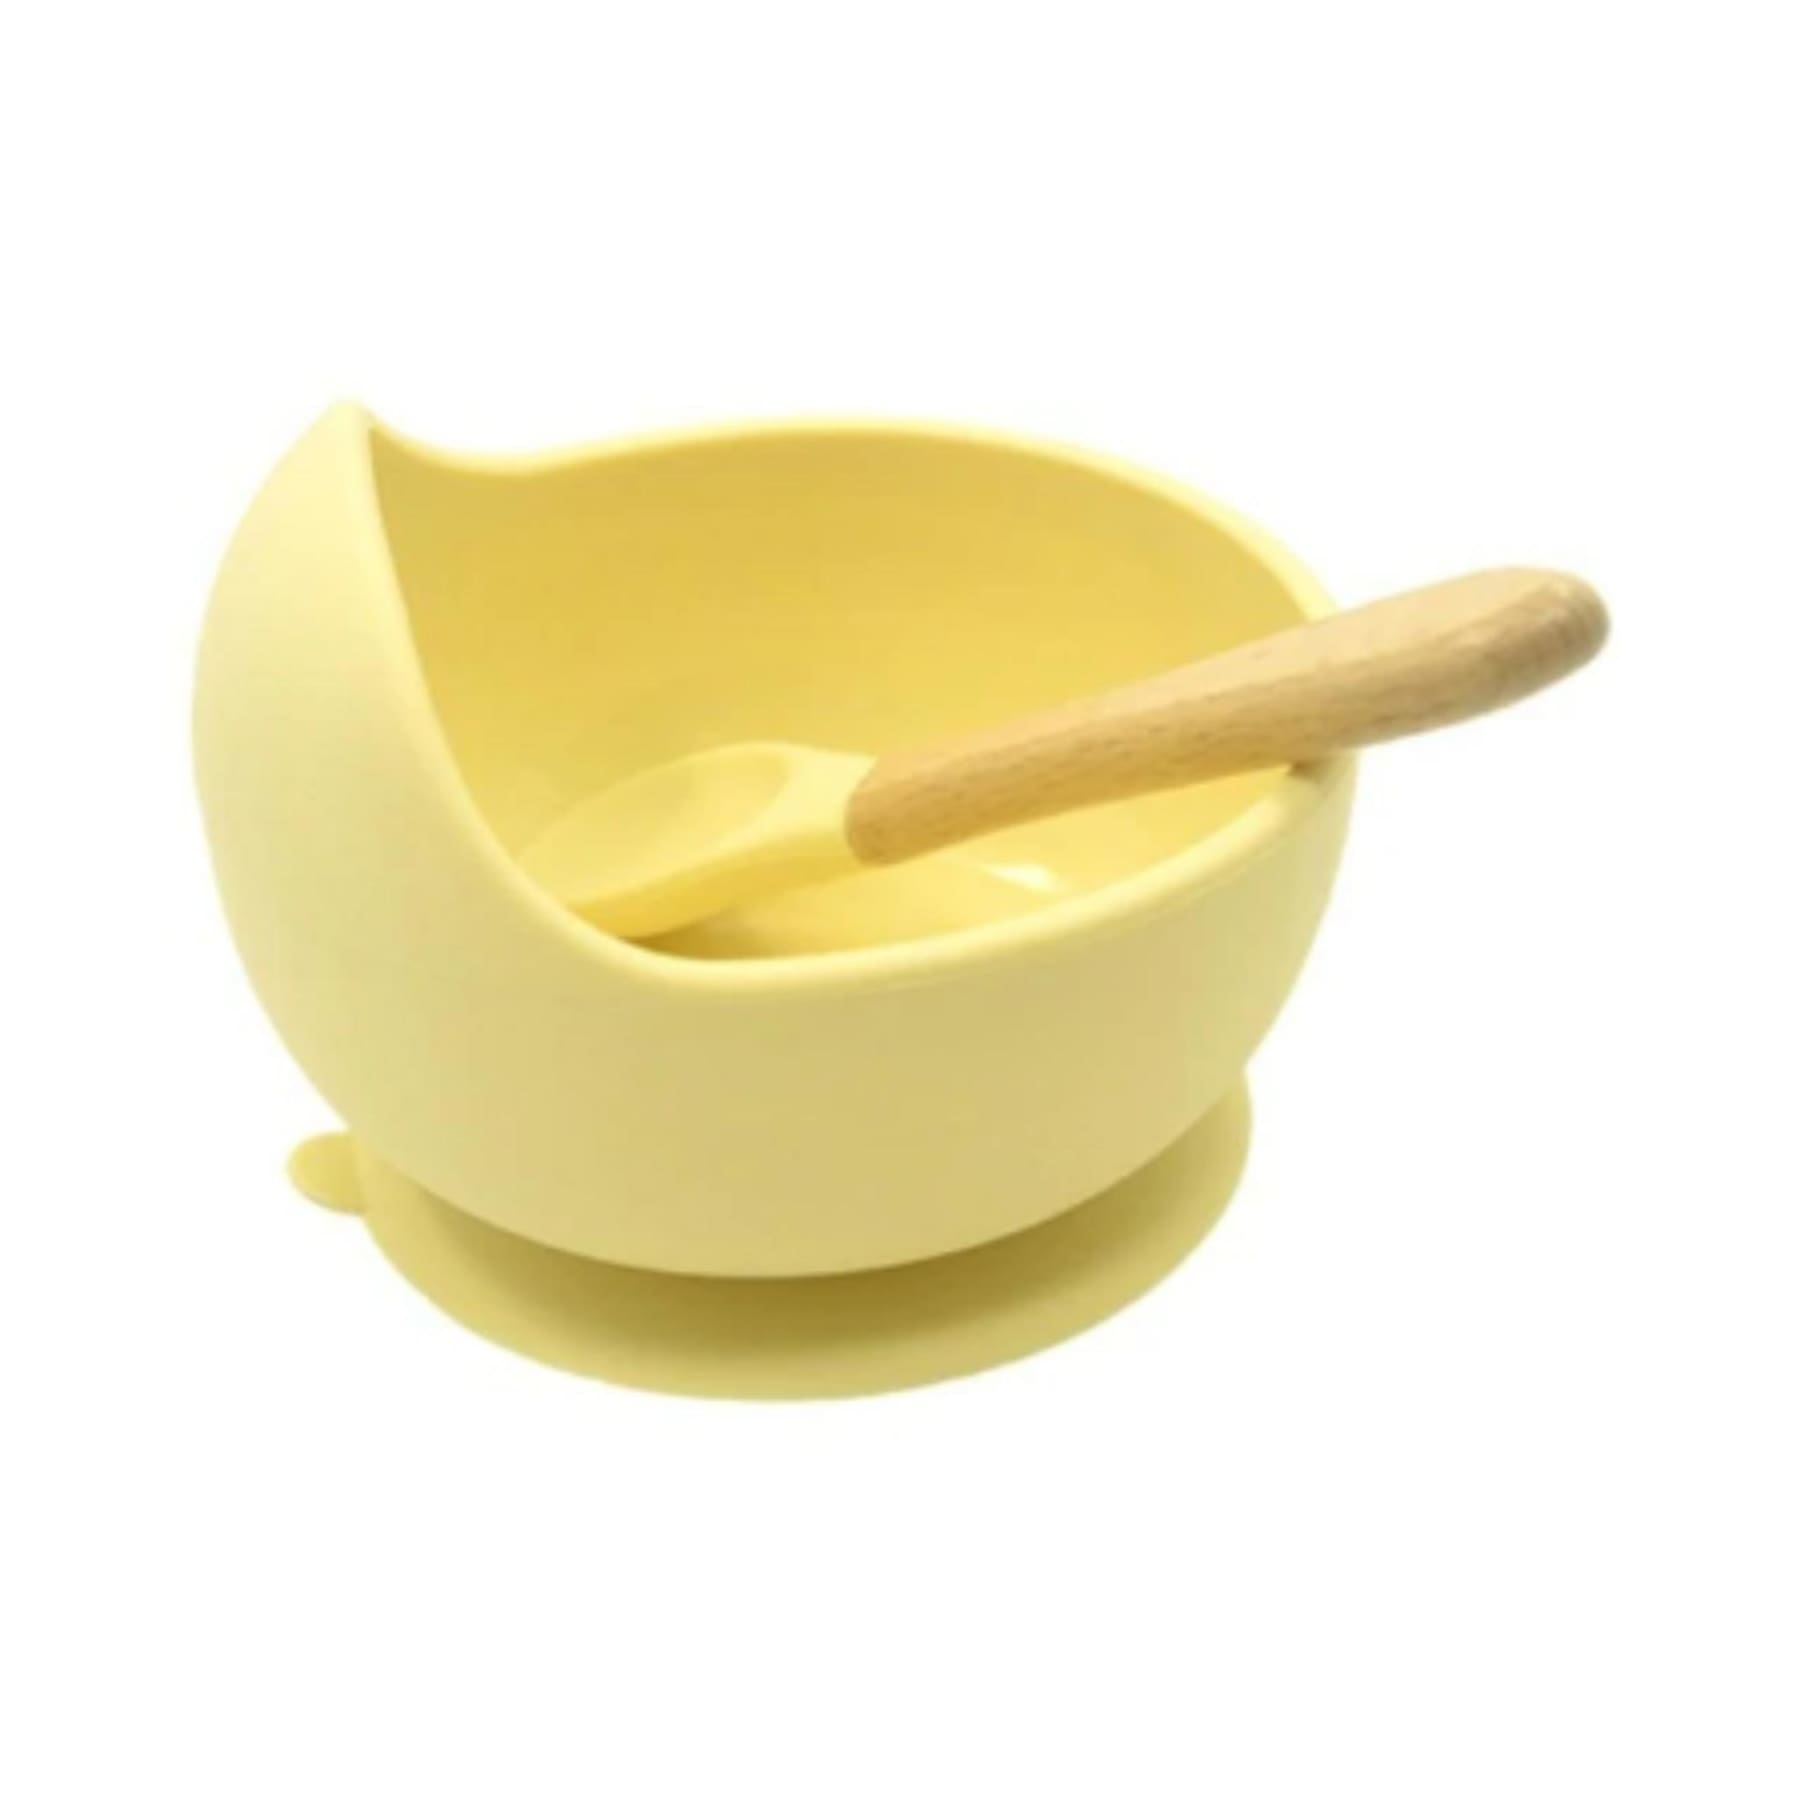 https://hunnybubbakids.com/cdn/shop/products/serveware-fashion-accessory-silicone-suction-baby-bowl-and-spoon-hunny-bubba-kids-yellow-884.jpg?v=1640401853&width=1946